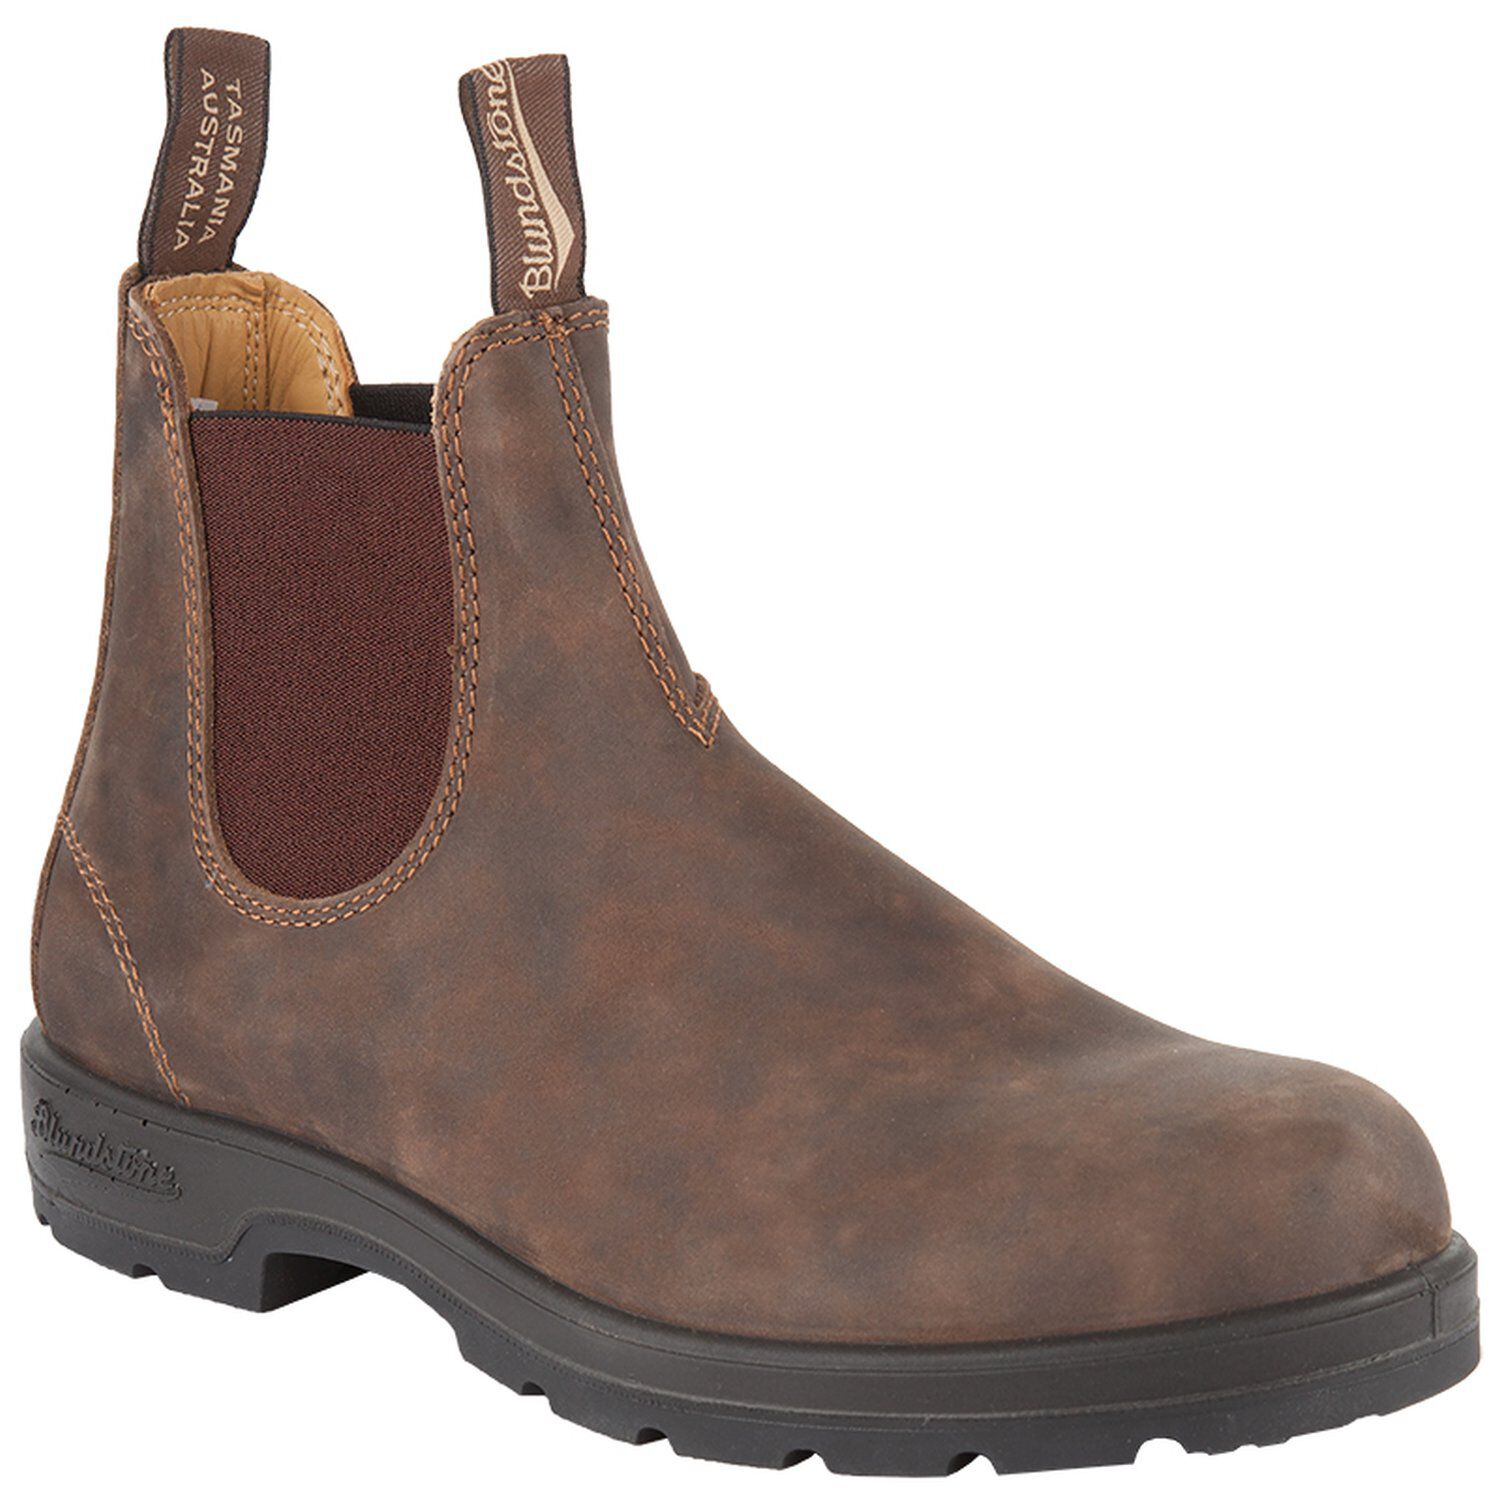 blundstone shoes price